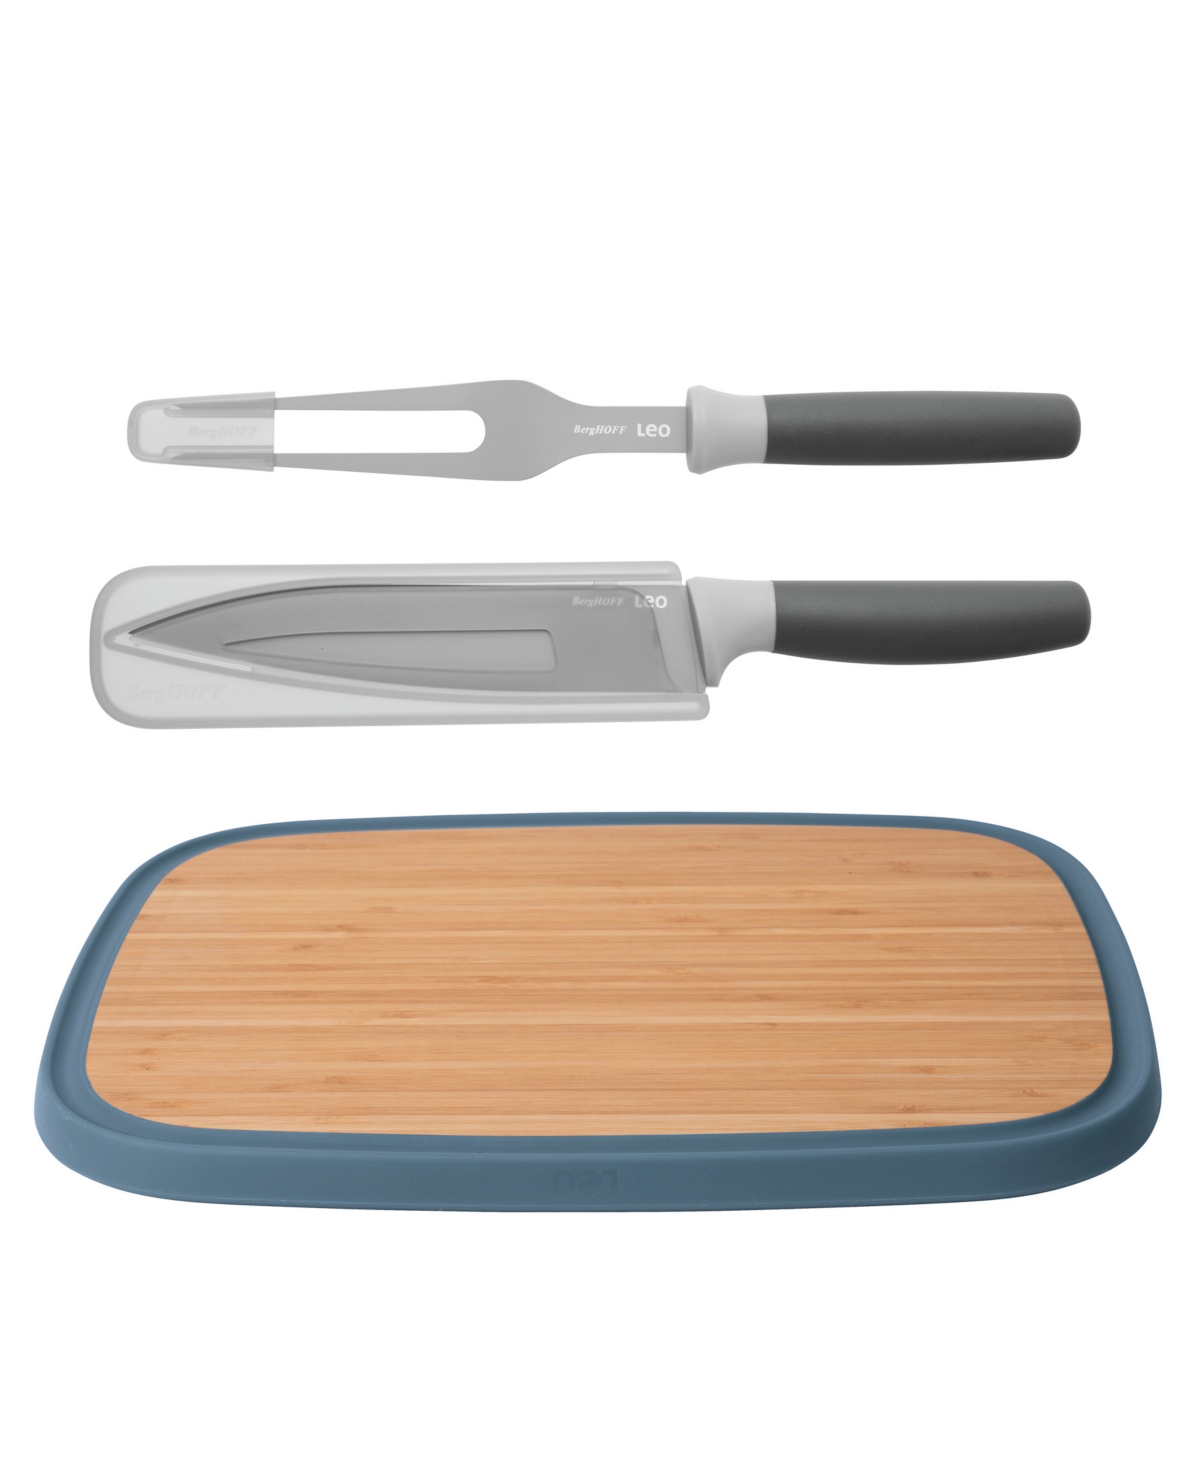 10205116 BergHOFF Leo Collection 3-Pc. Carving Set sku 10205116